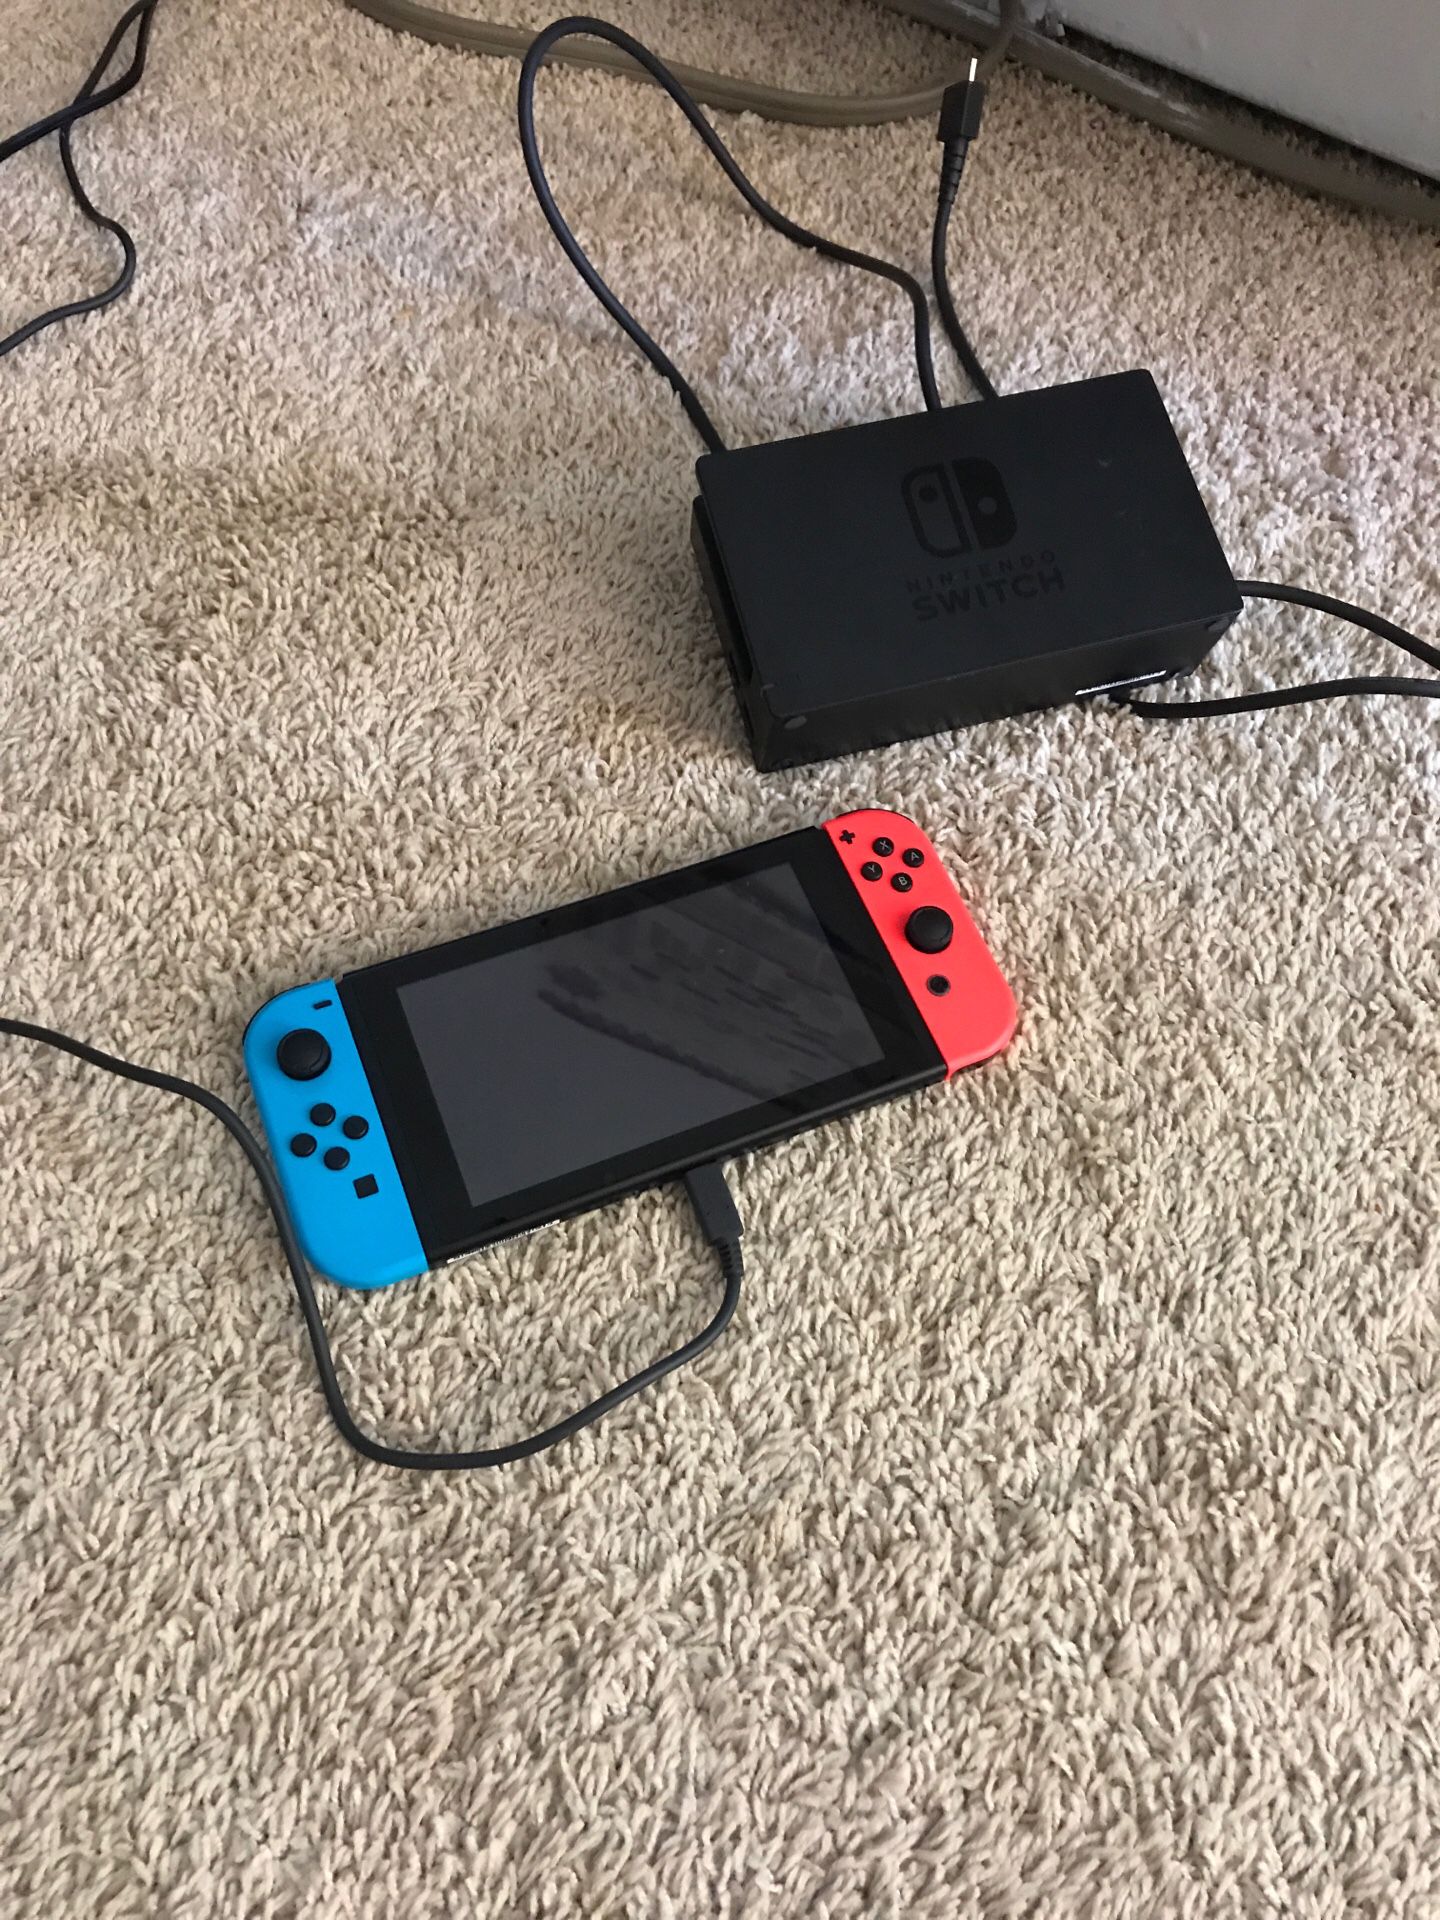 Nintendo Switch Blue/Red with Dock